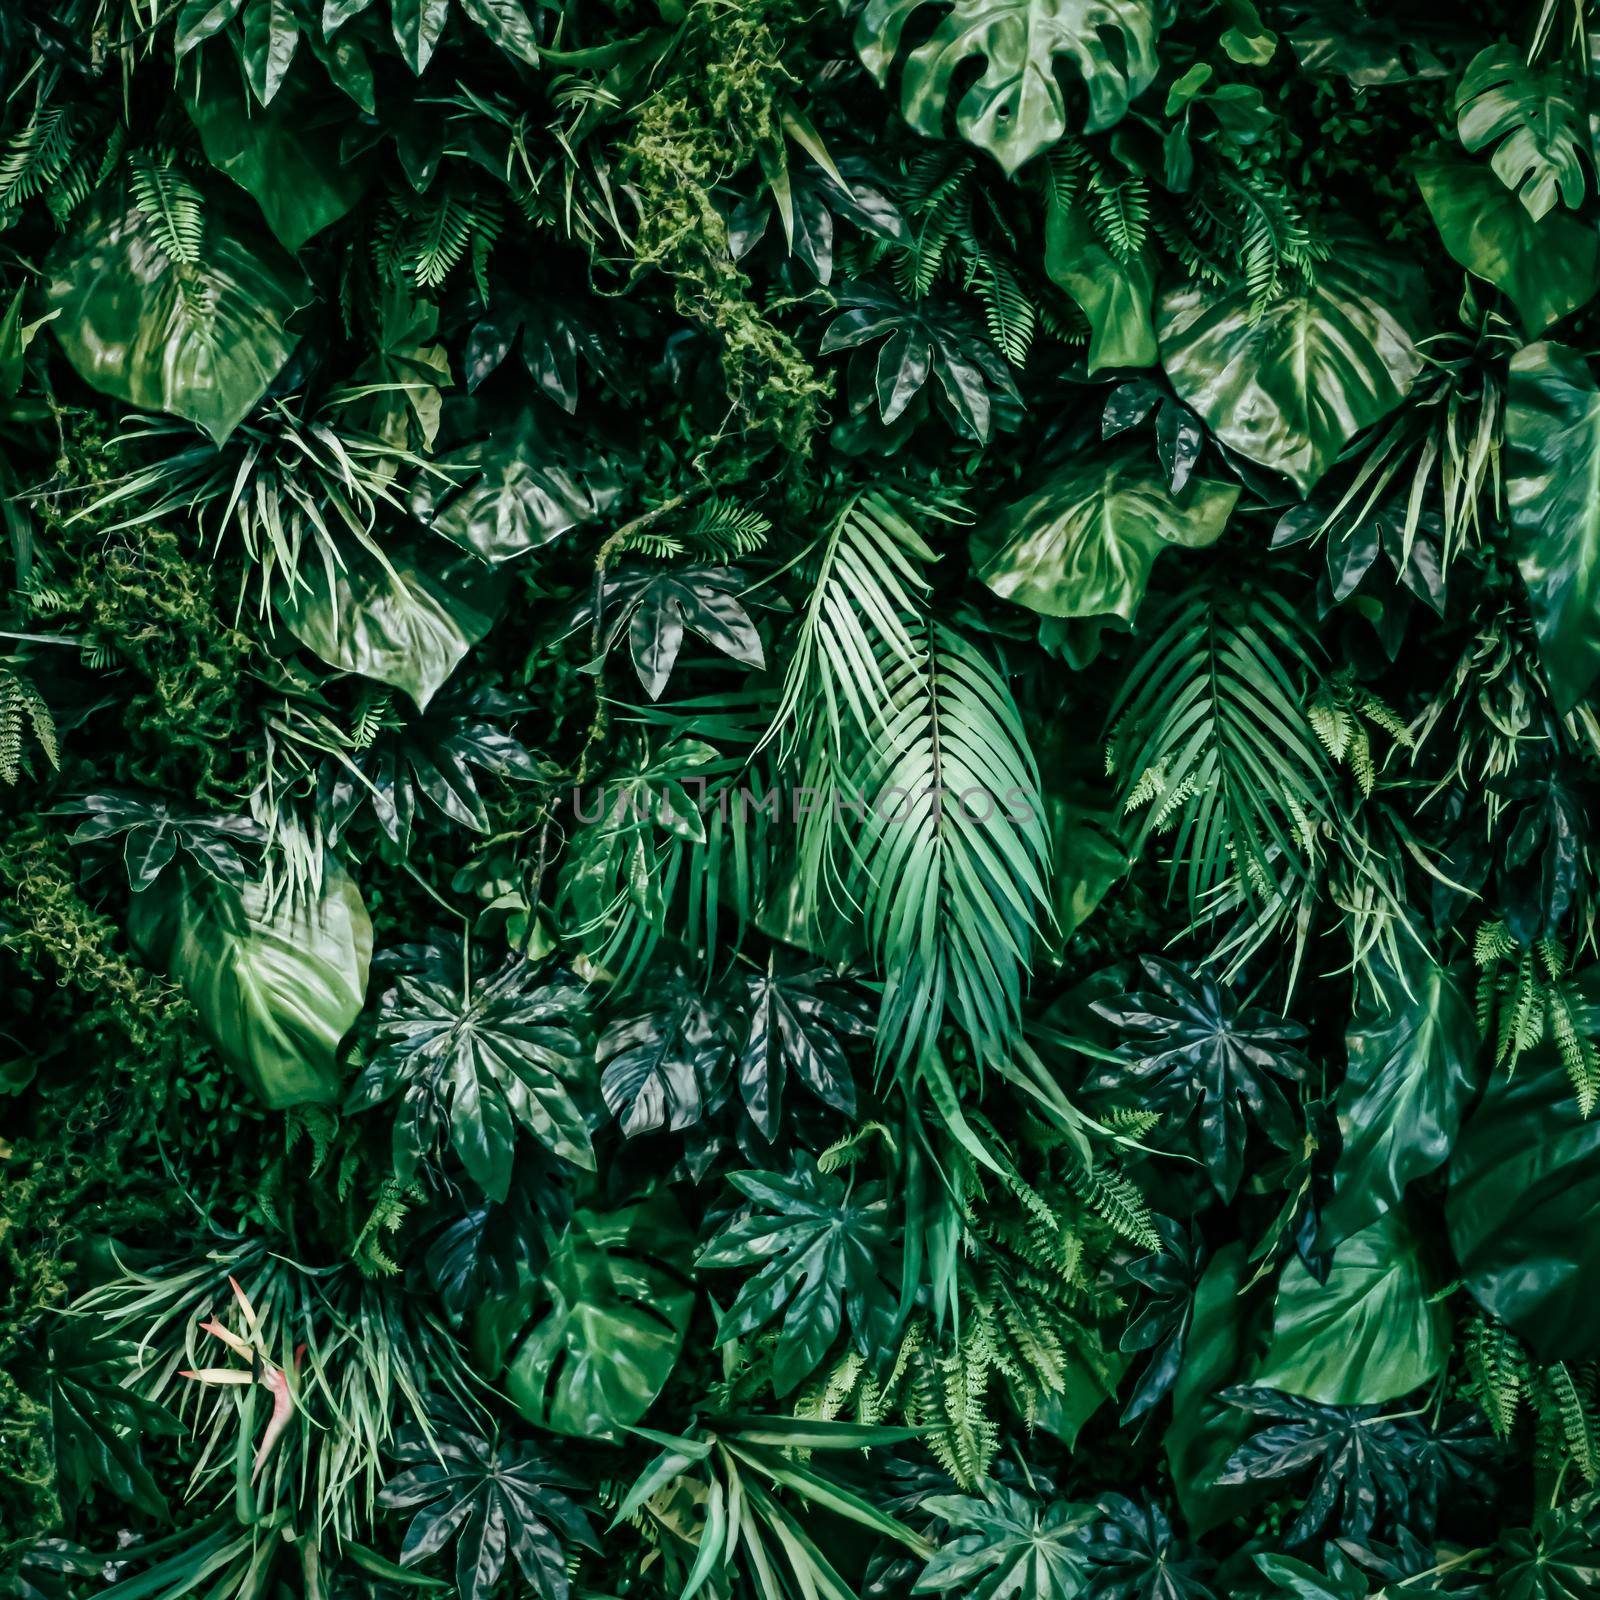 Tropical leaves as nature and environmental background, botanical garden and floral backdrop, plant growth and landscape design.